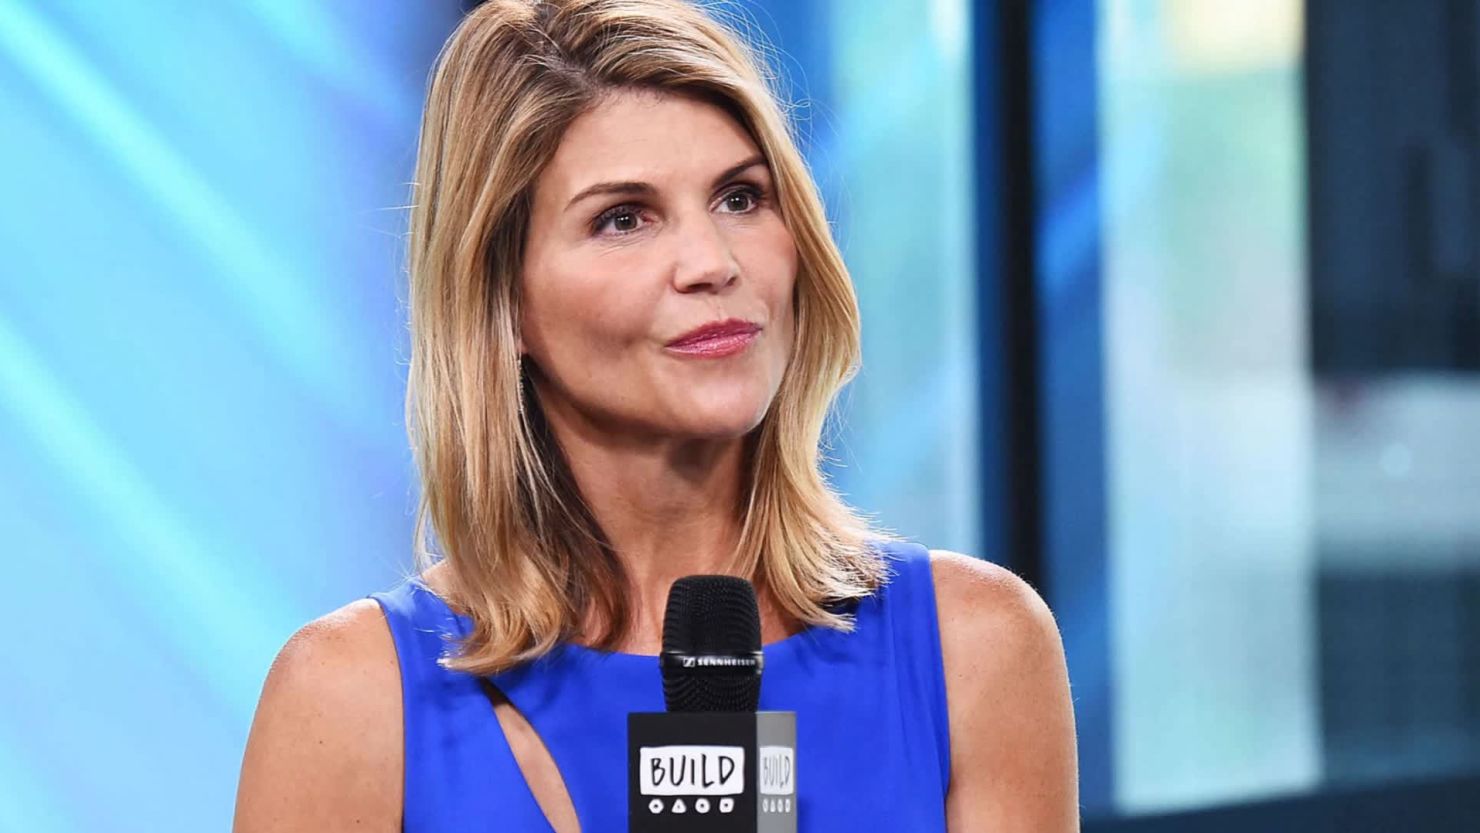 Lori Loughlin to Mark Acting Return on 'When Calls the Heart